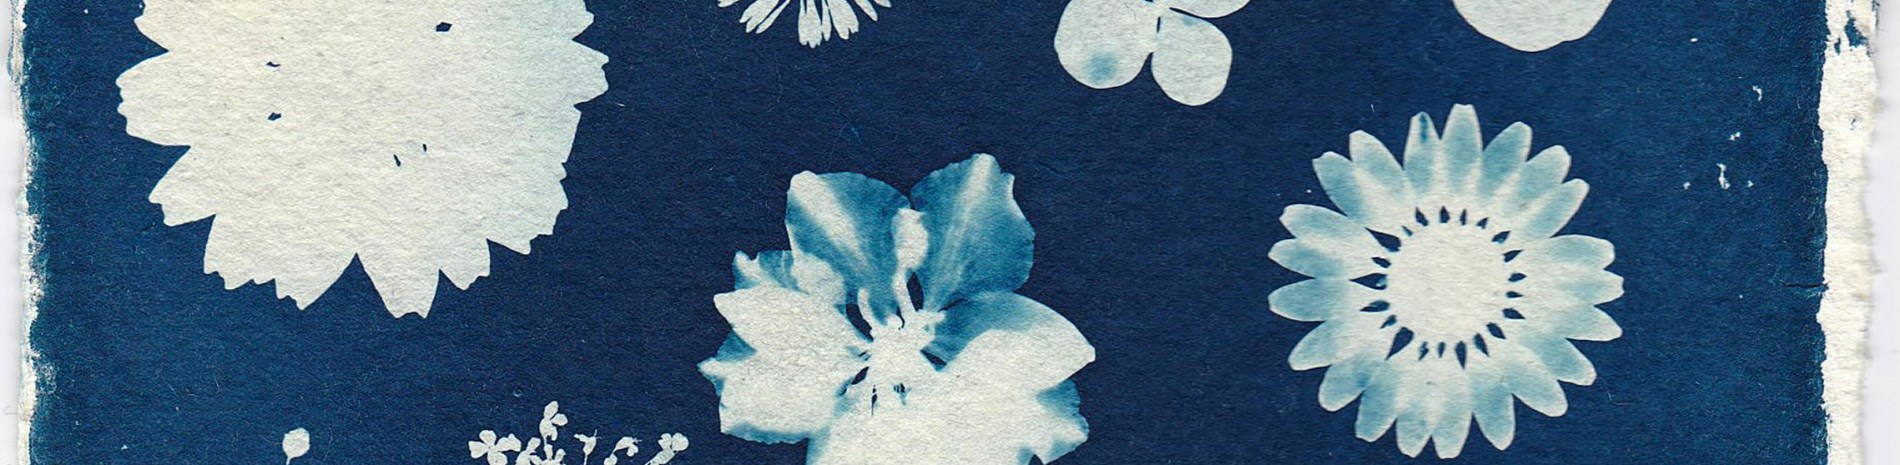 A close-up of a cyanotype print, showing the white outlines of flowers over a deep blue background.